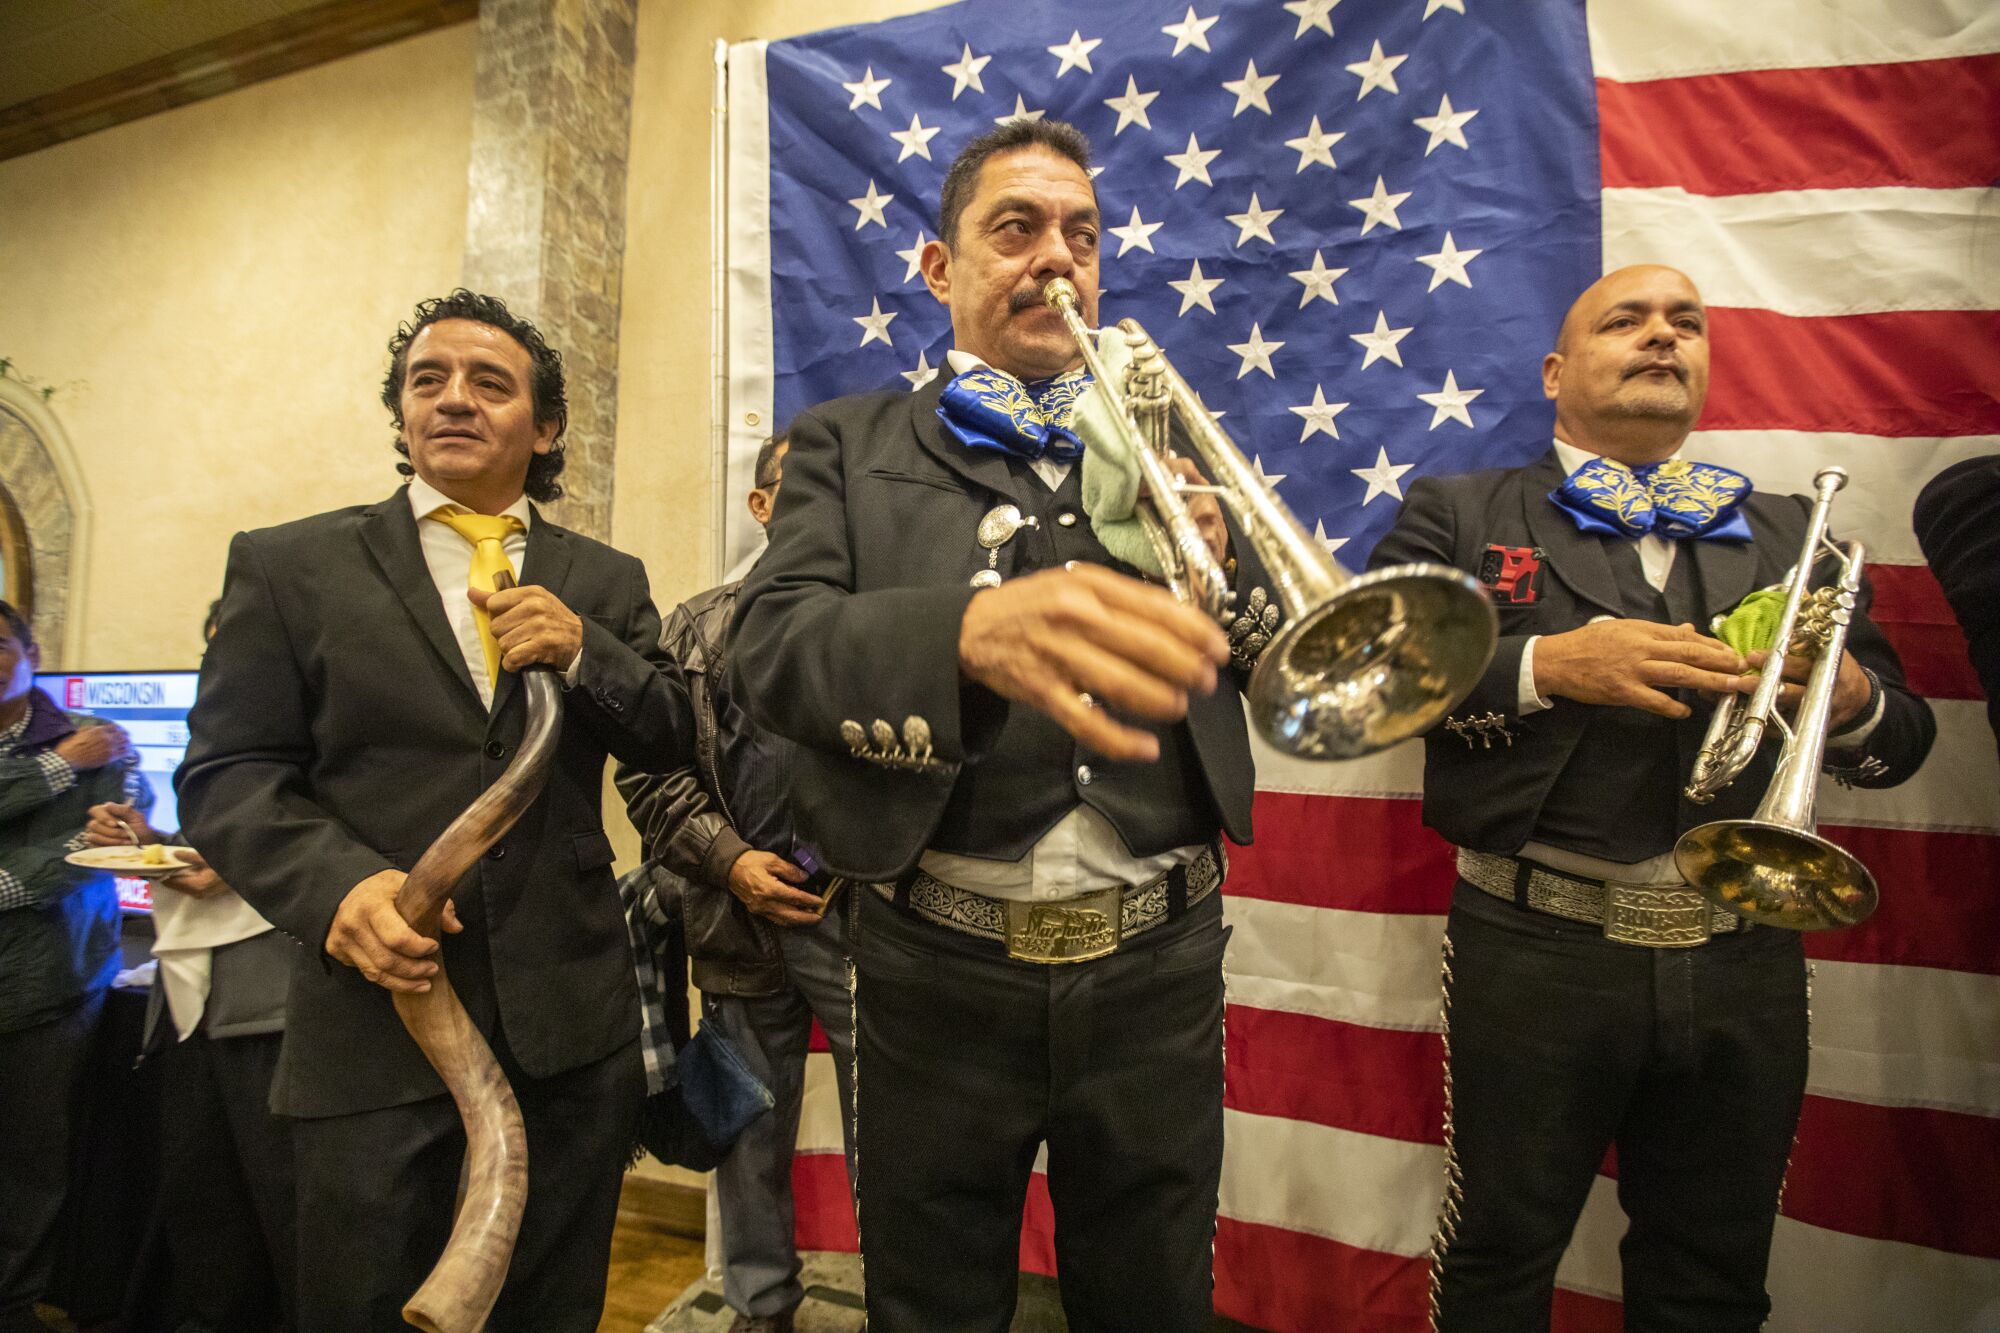 A mariachi band performs during Robert Luna's election night party in Long Beach.